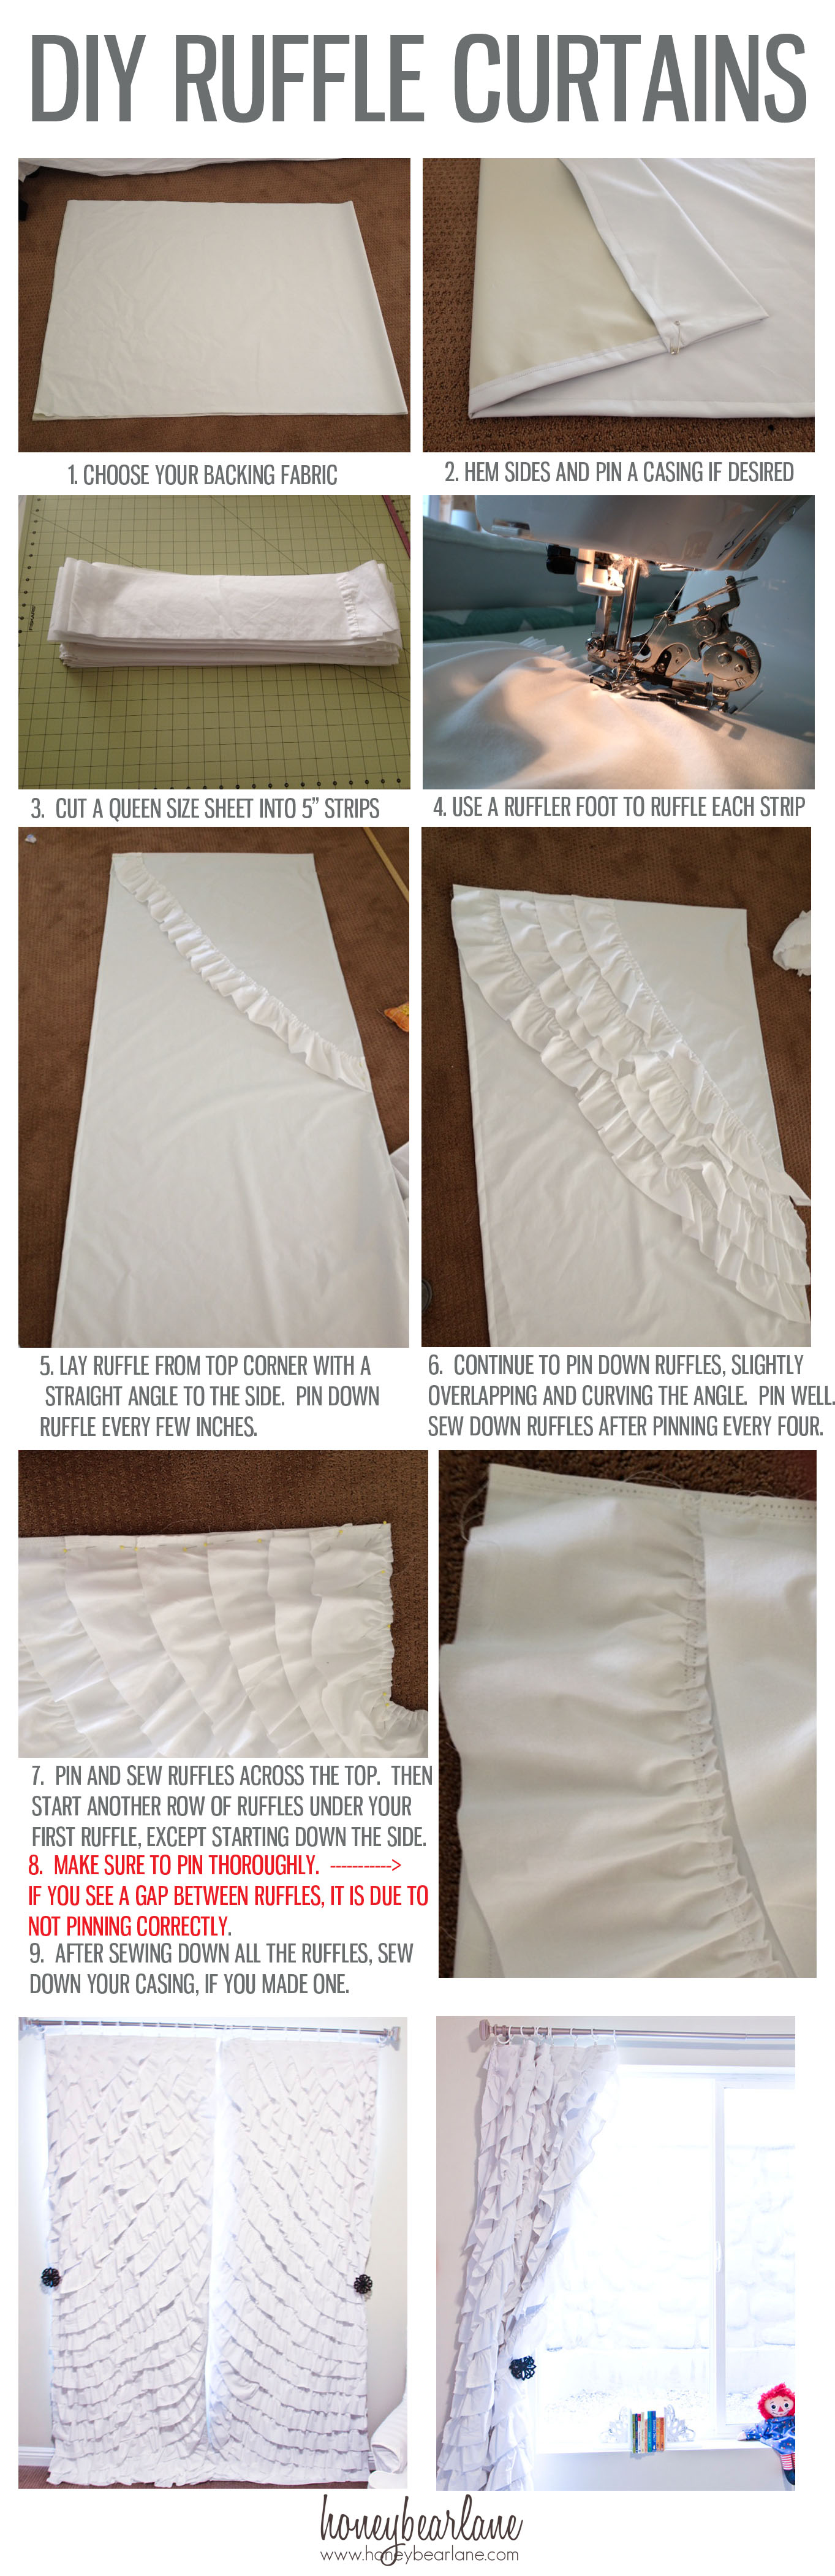 How to Make Ruffled Curtains